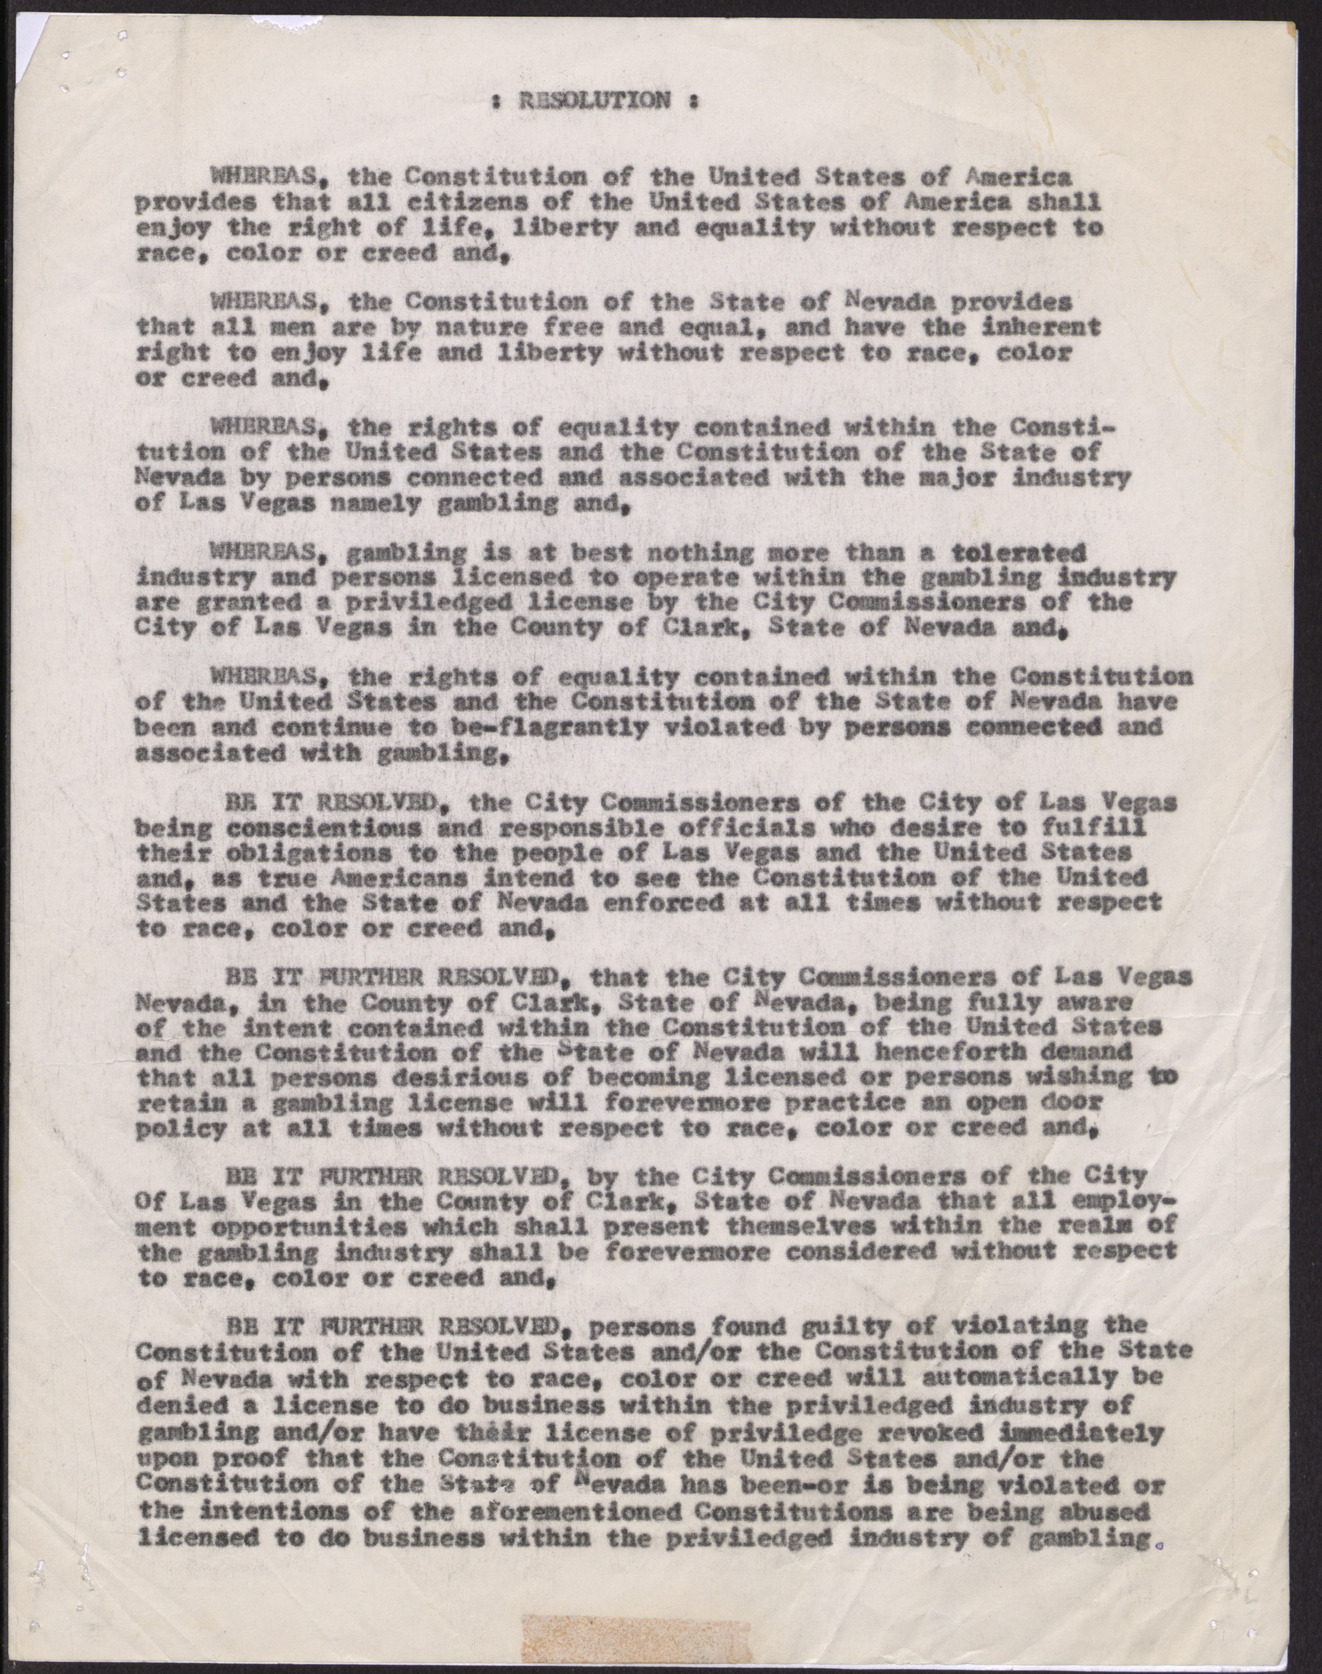 Letter to the Las Vegas City Commissioners from Donald M. Clark, July 26, 1961, page 2